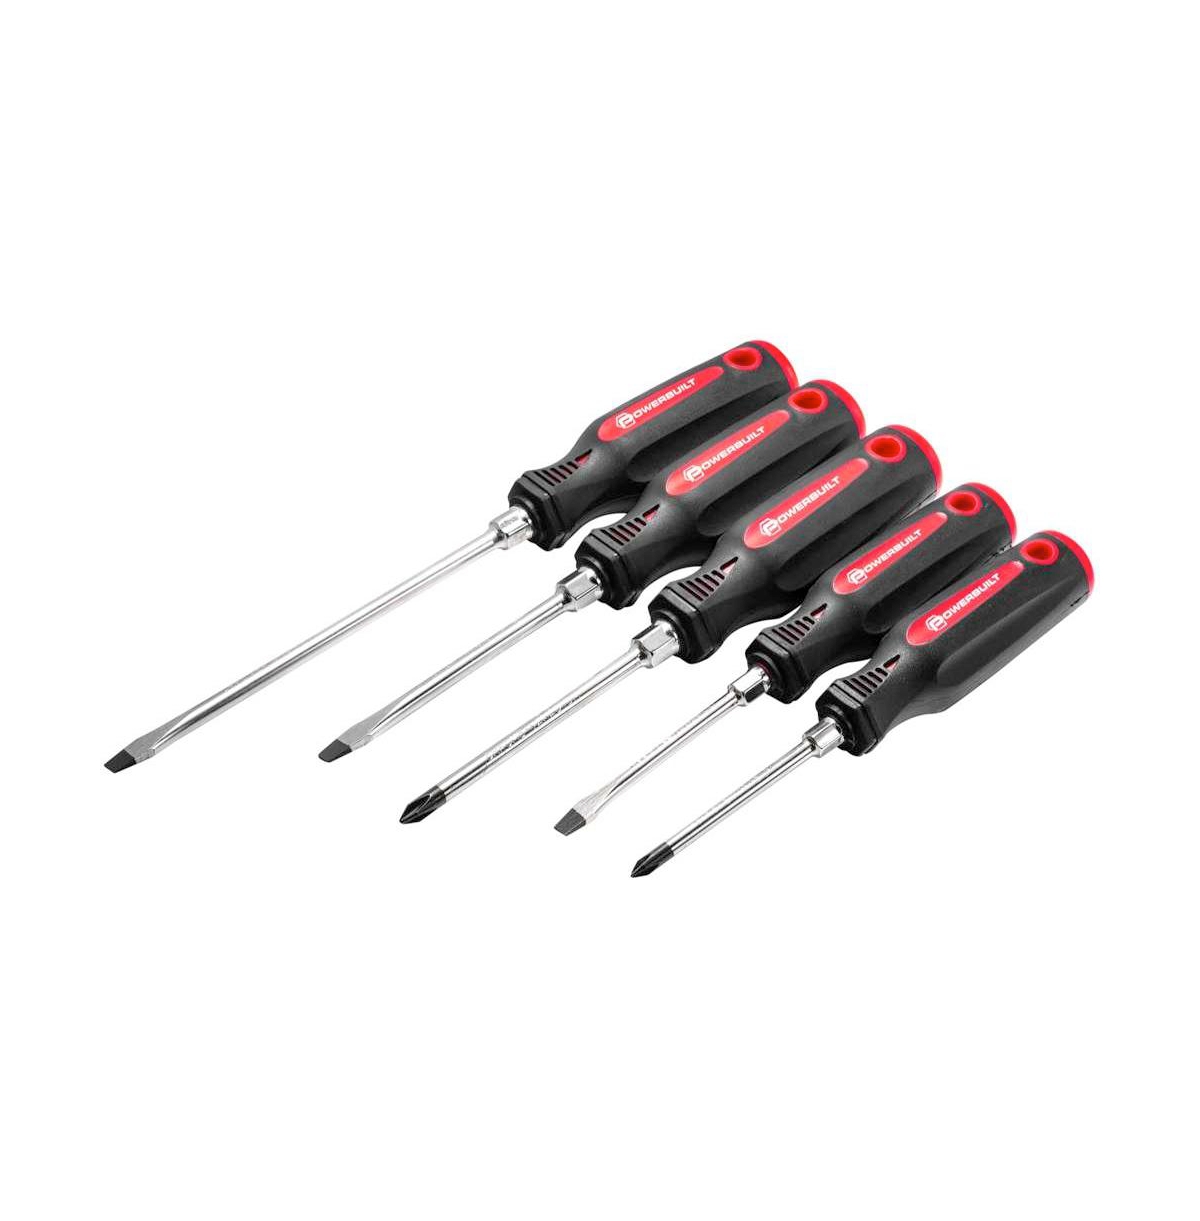 5 Piece Screwdriver Set with Double Injection Handles - Red